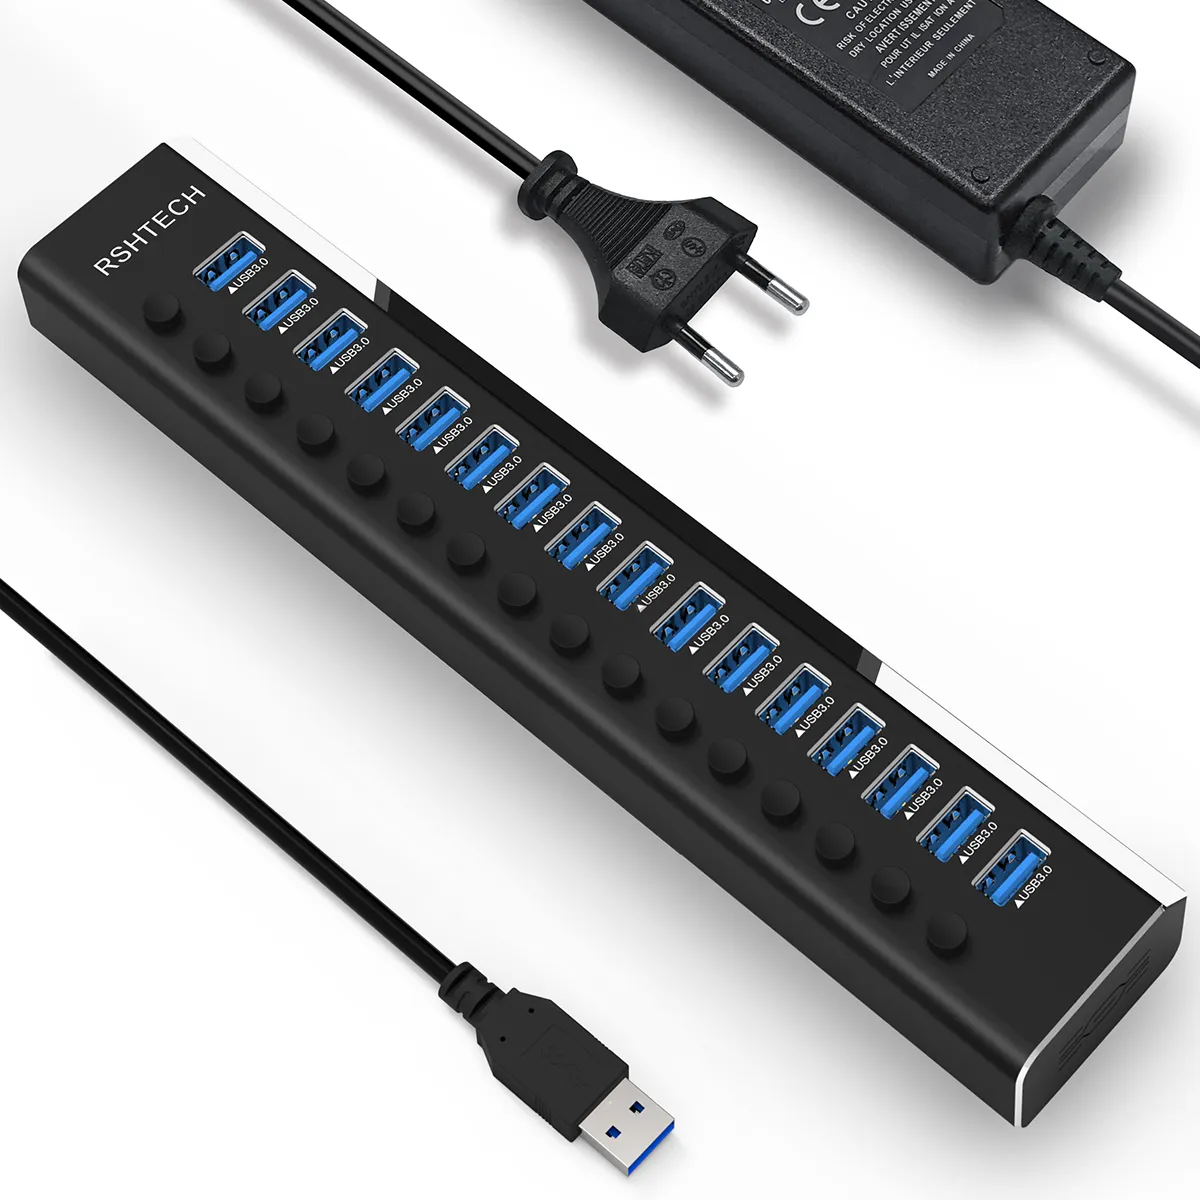 RSHTECH 16 in 1 USB 3.0 Hub Splitter 100W Power Supply Adapter Separate Switches 16 Ports USB Hub For PC Computer Accessories